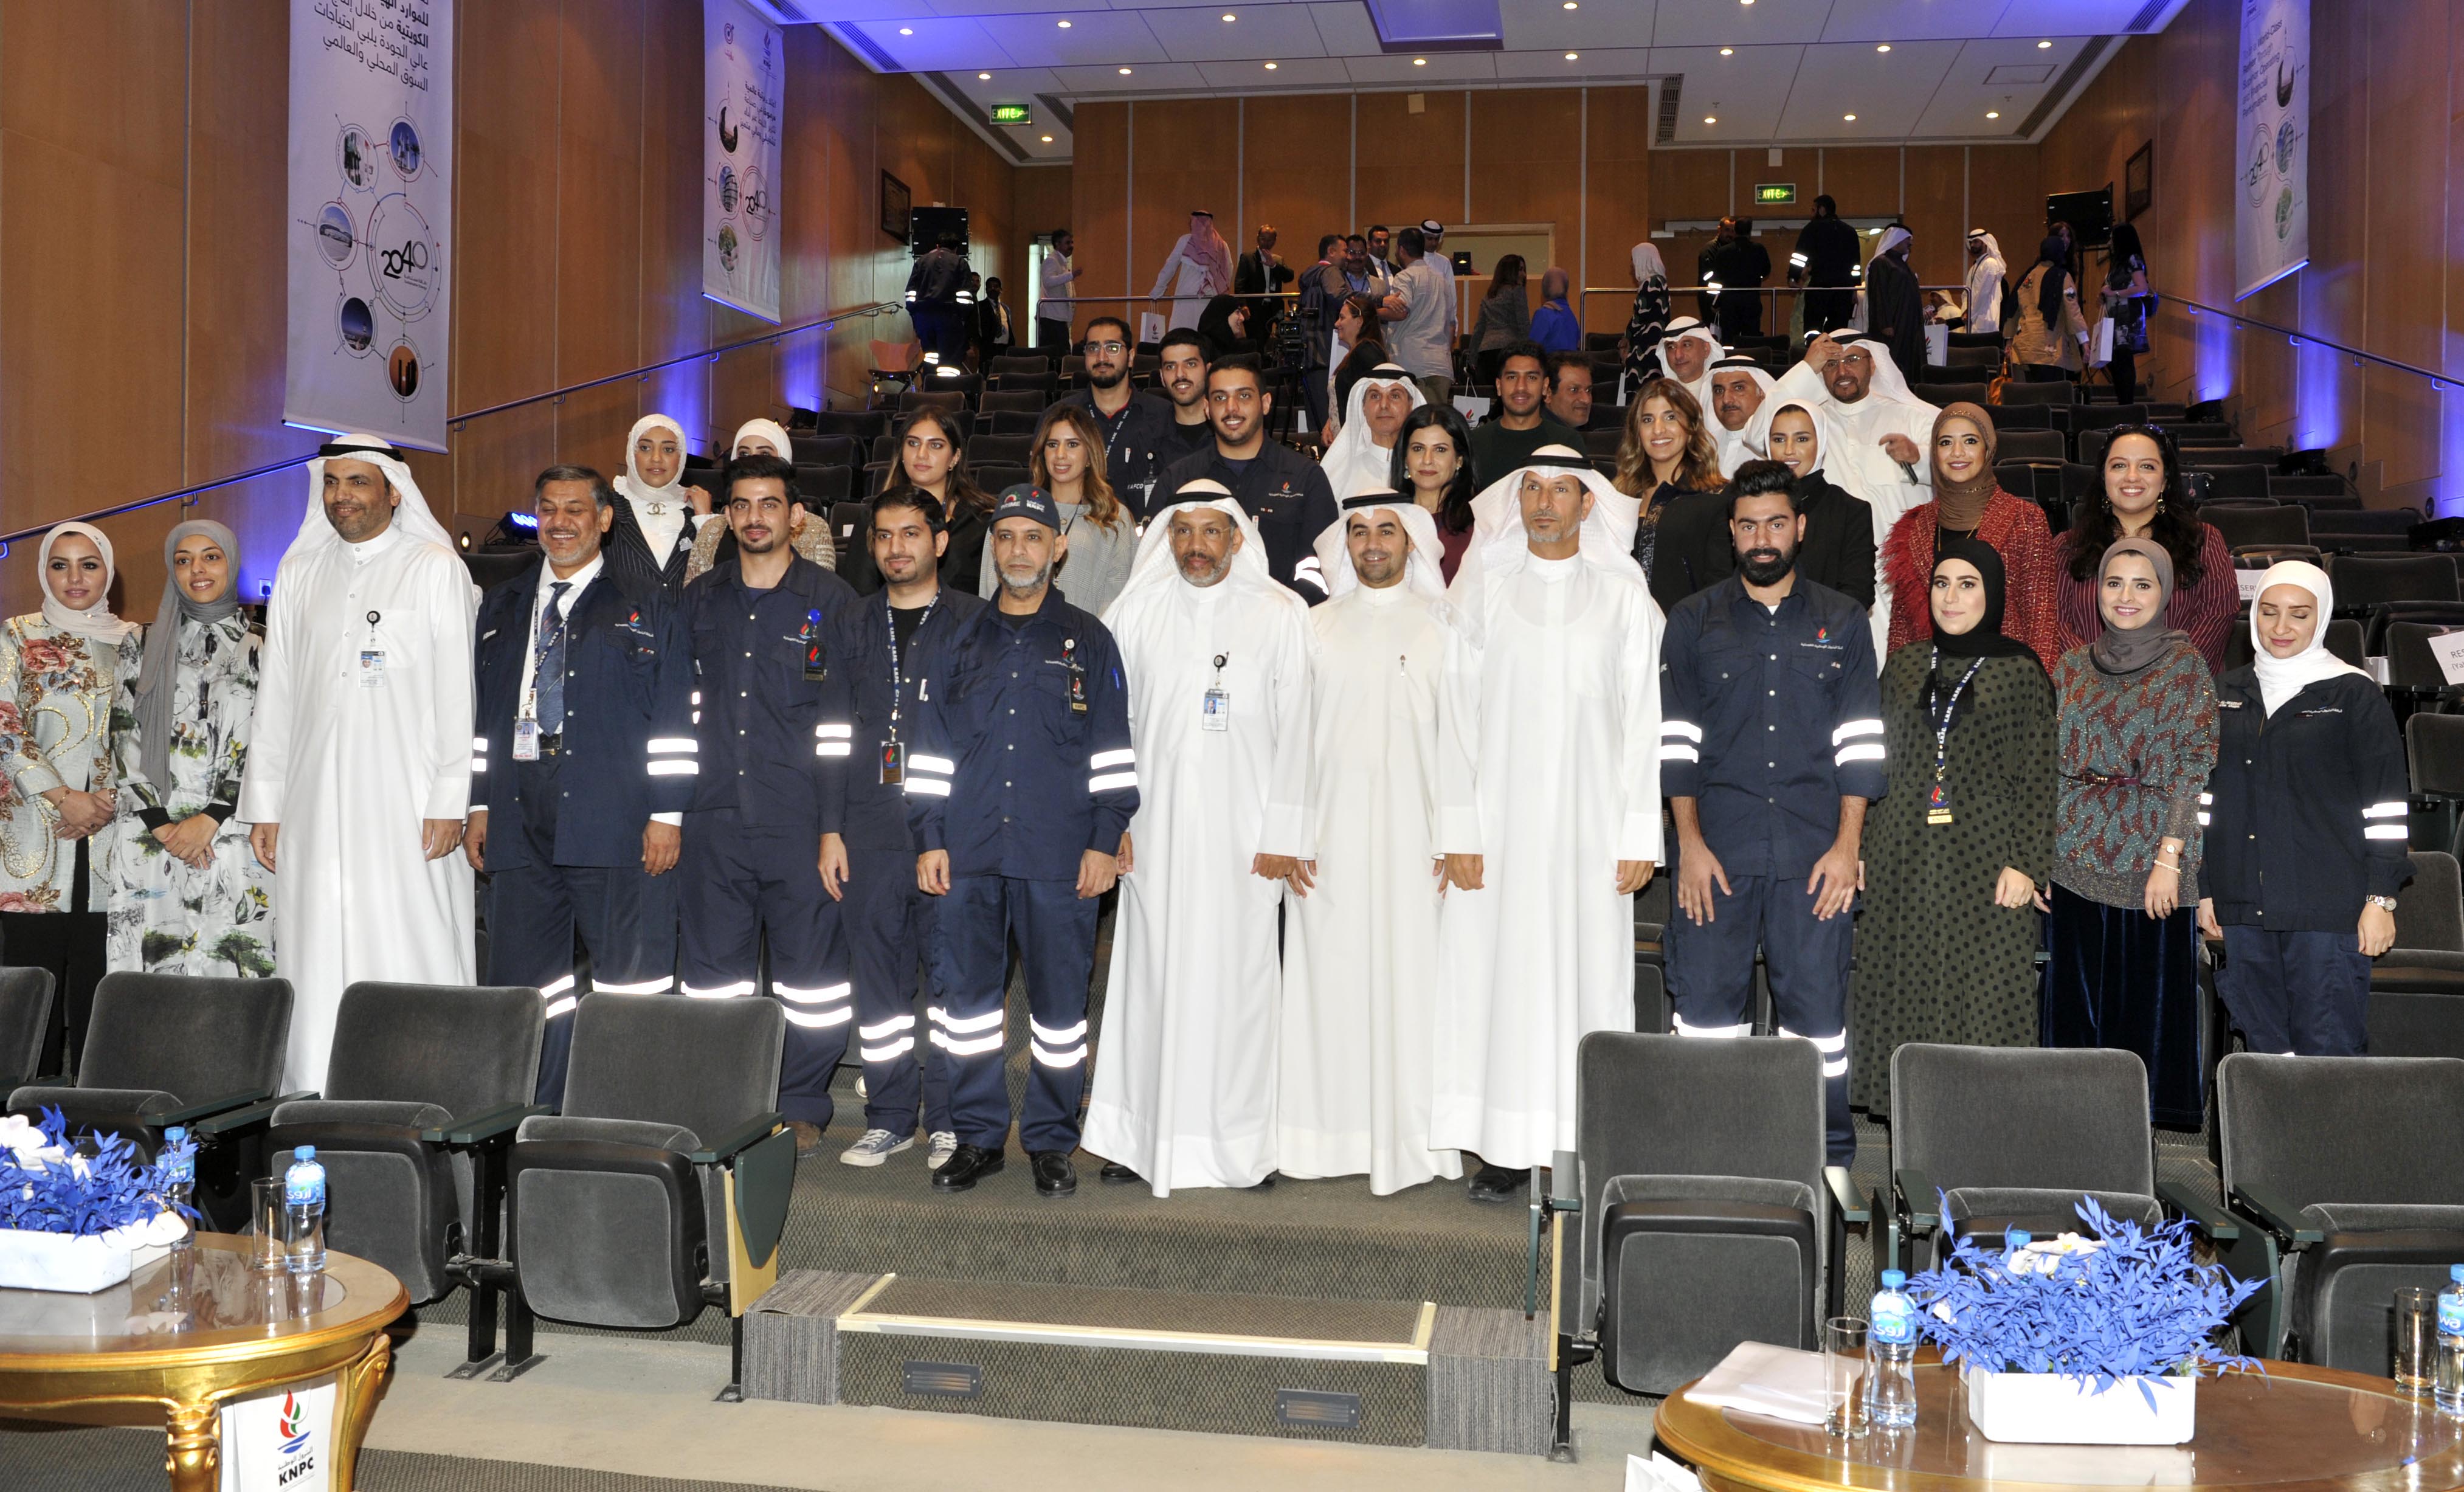 The participants in the ceremony to launch of the Kuwait National Petroleum Company's 2040 strategy